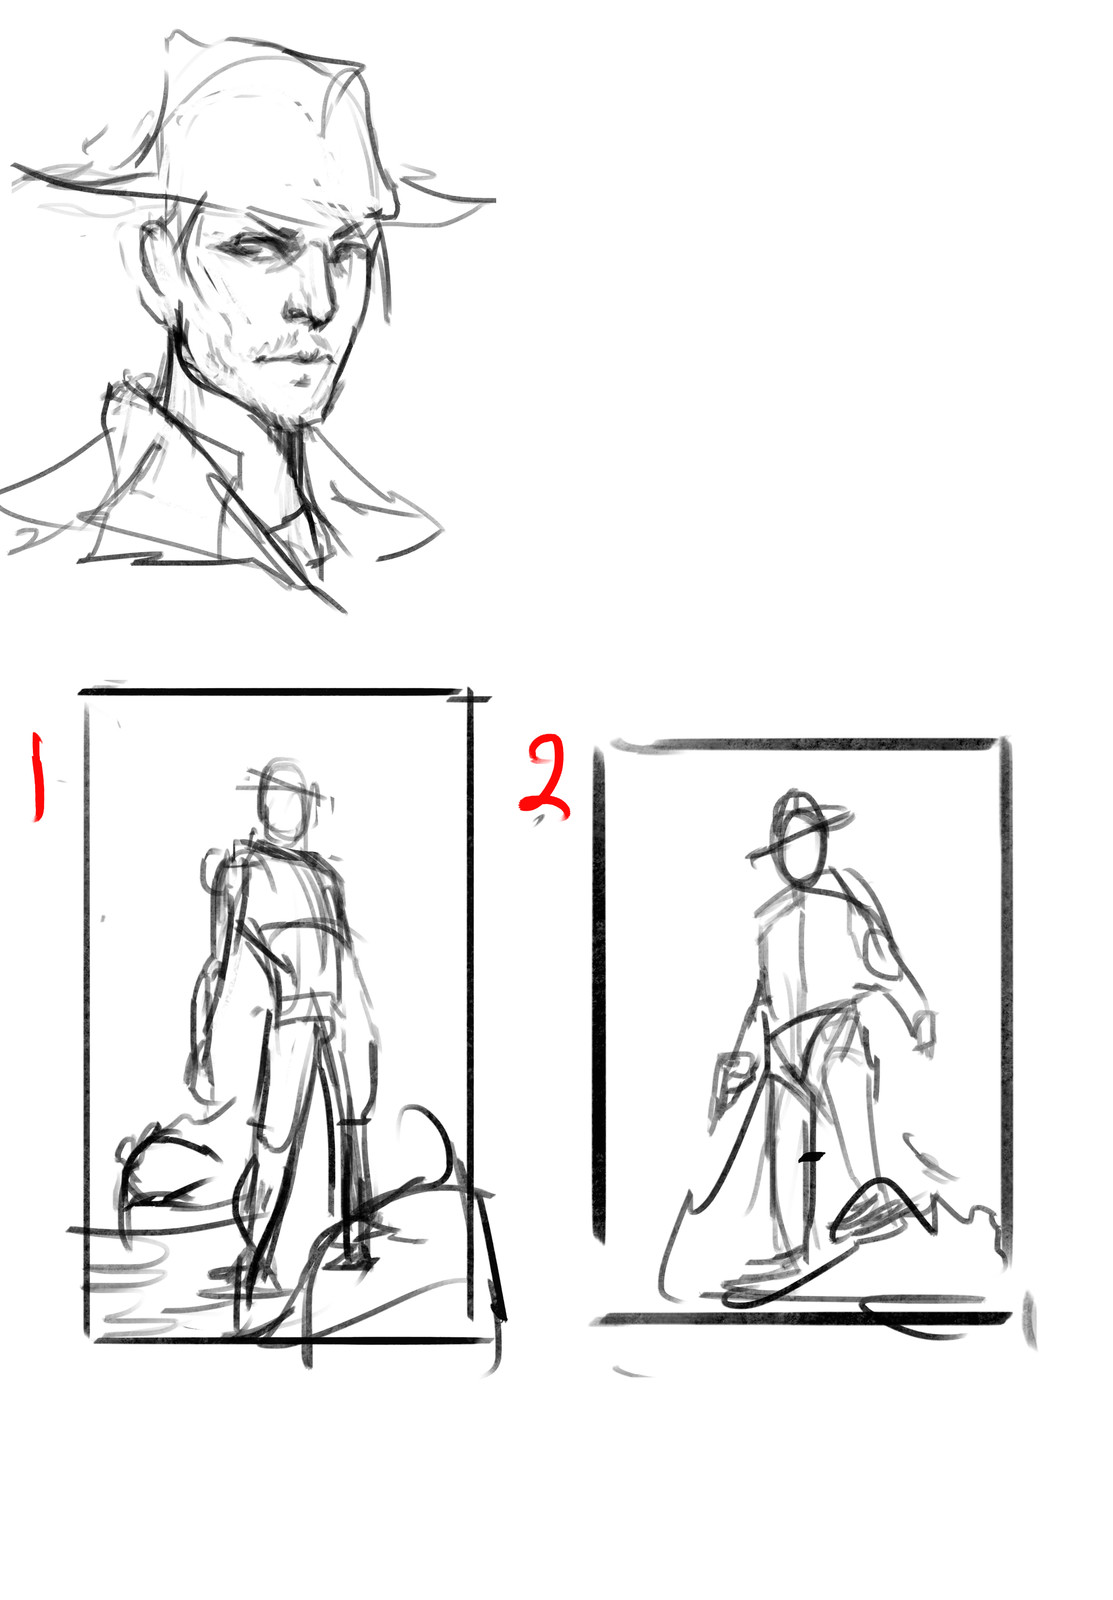 Initial Sketch and Thumbnails